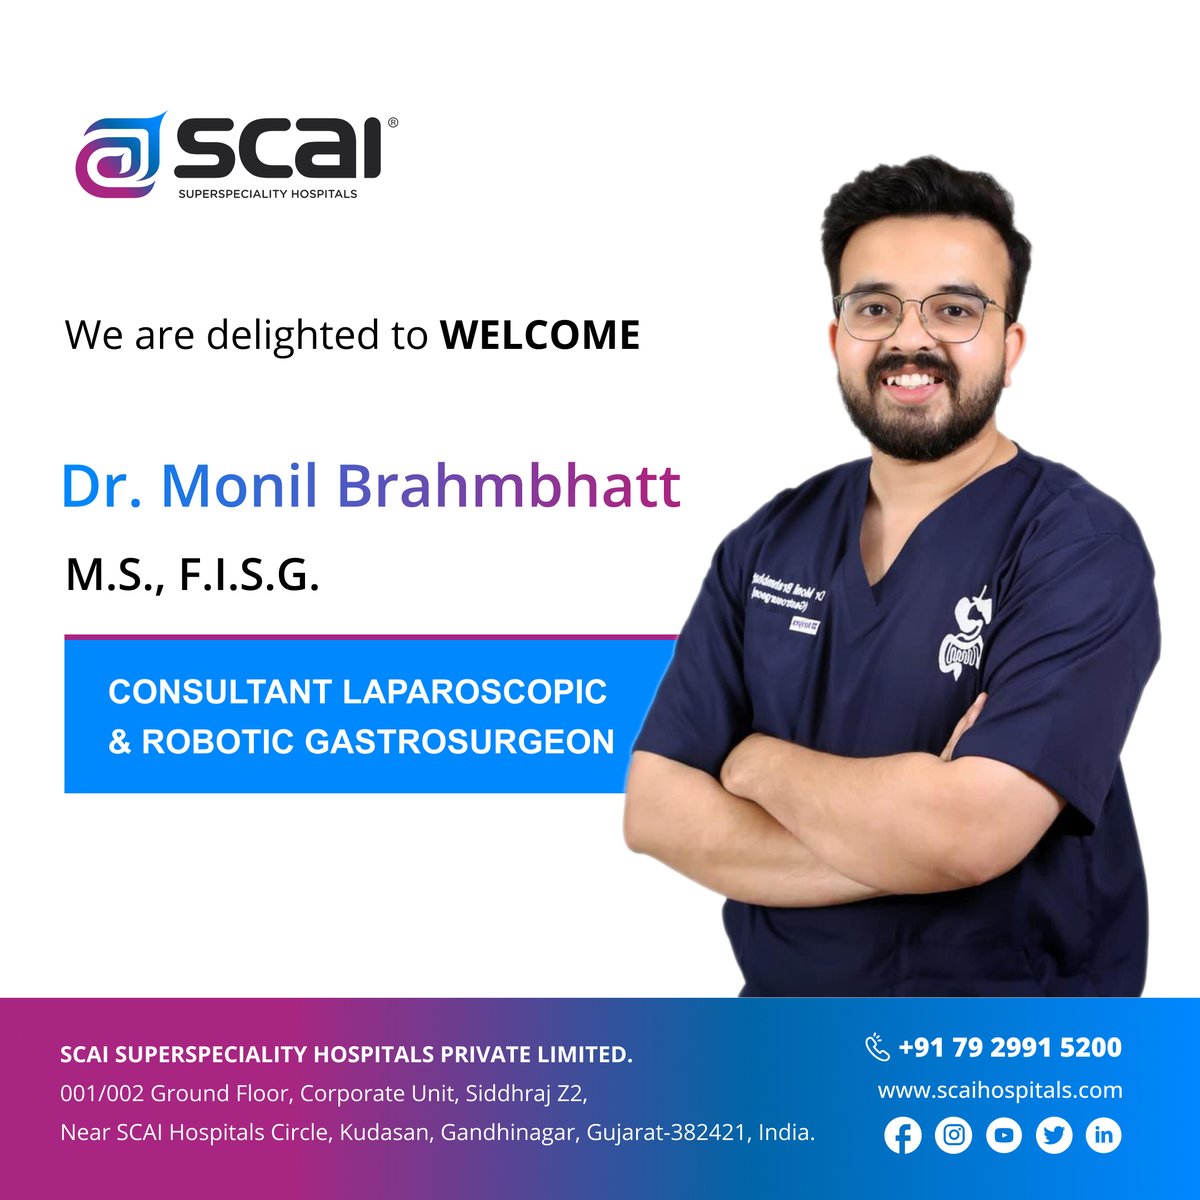 SCAI Hospitals welcomes Dr. Monil Brahmbhatt, M.S., F.I.S.G., Consultant Laparoscopic and Robotic Gastrosurgeon.

For appointments, Call us on 079 2991 5200.
.
.
#SCAI #Hospitals #Robotic #Gastrosurgeon #LaparoscopicSurgeon #RoboticSurgery #Doctors #Surgery #Gujarat #Gandhinagar